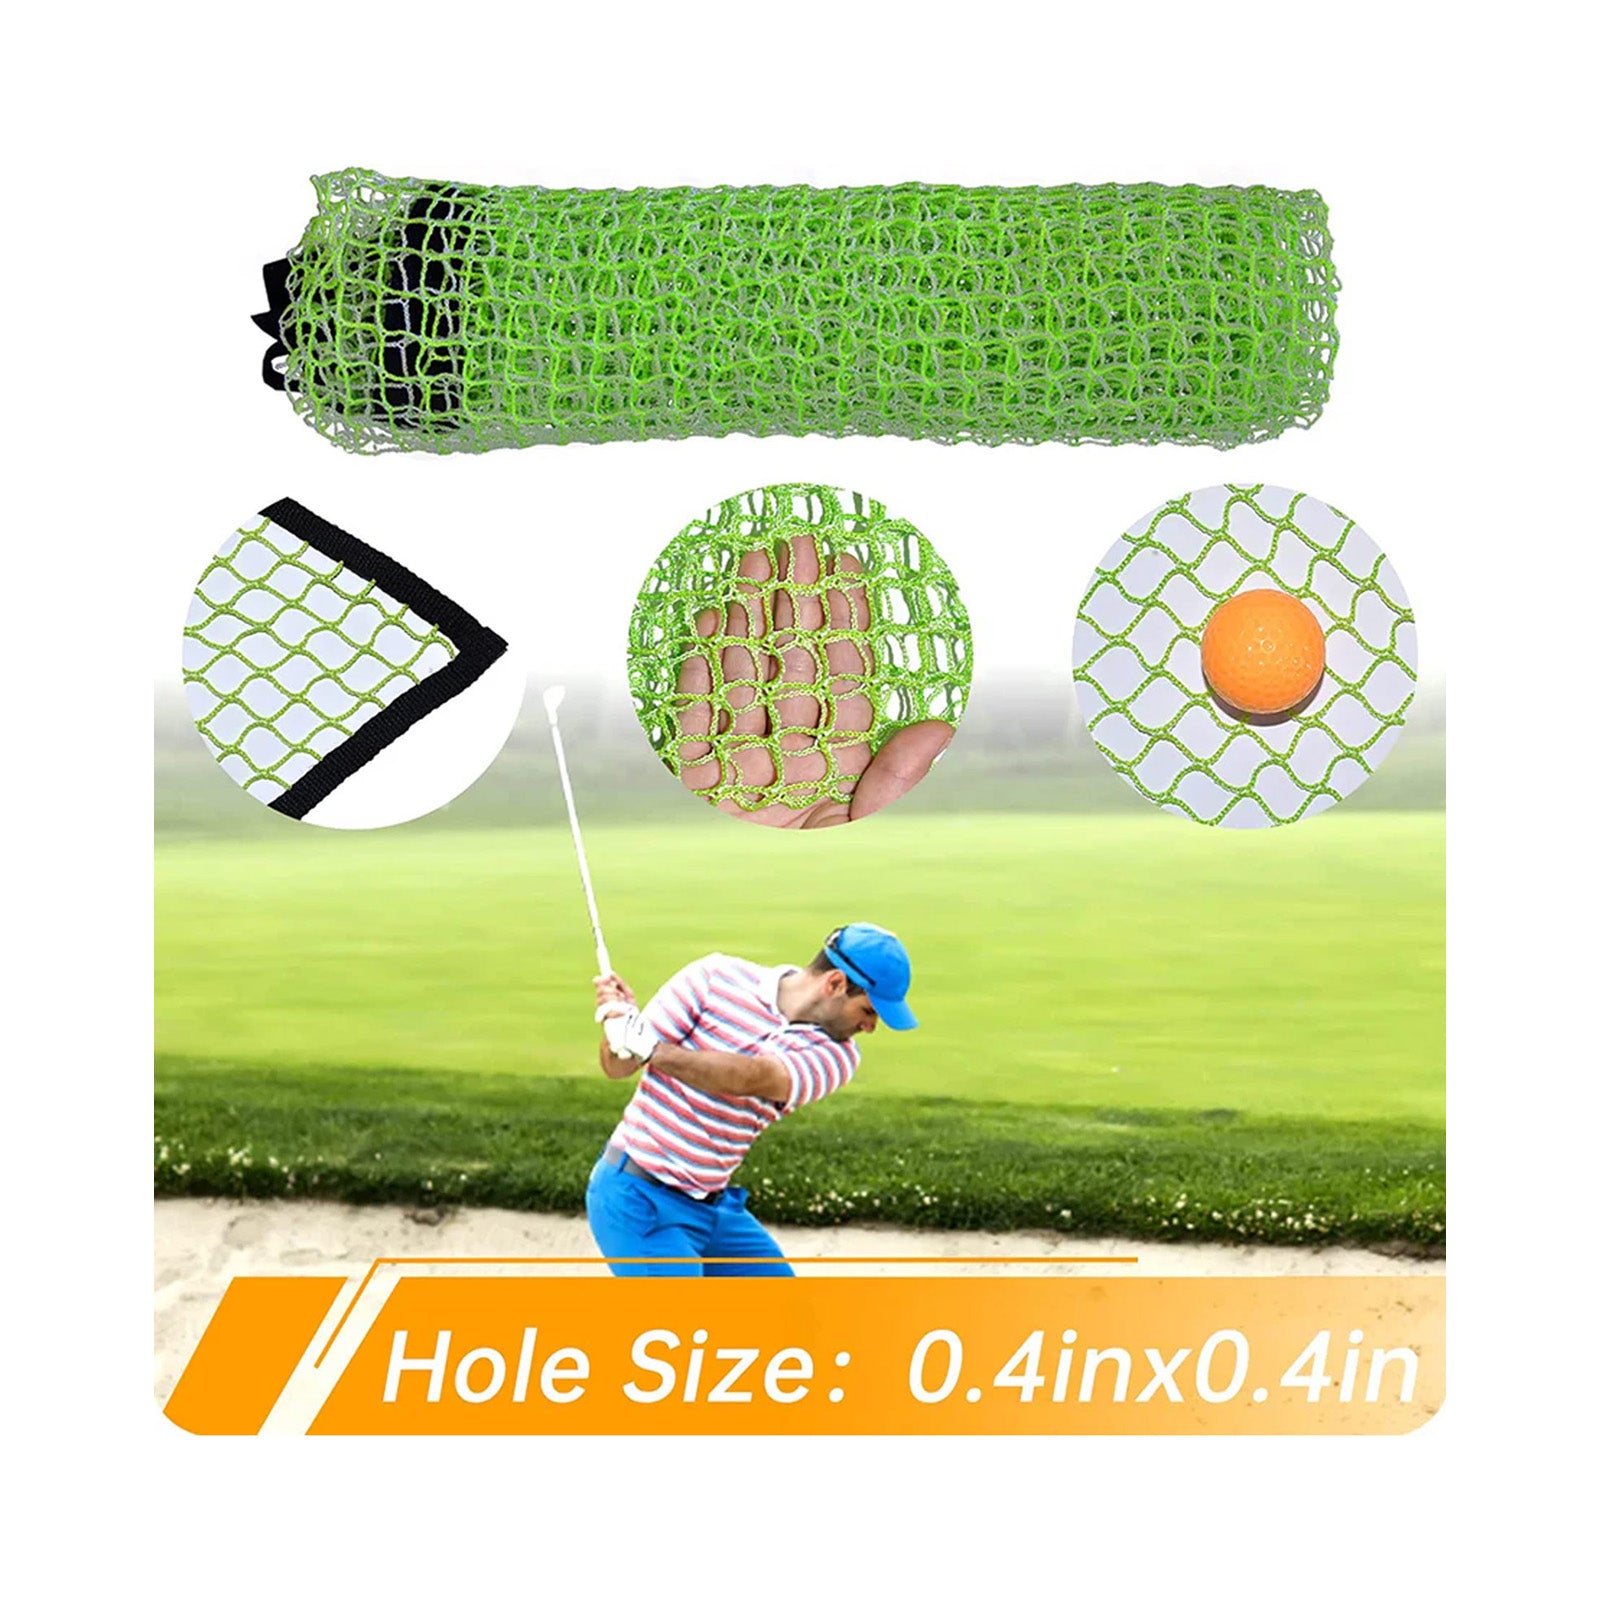 7X7 Galileo Golf Cage Replacement Net Piece